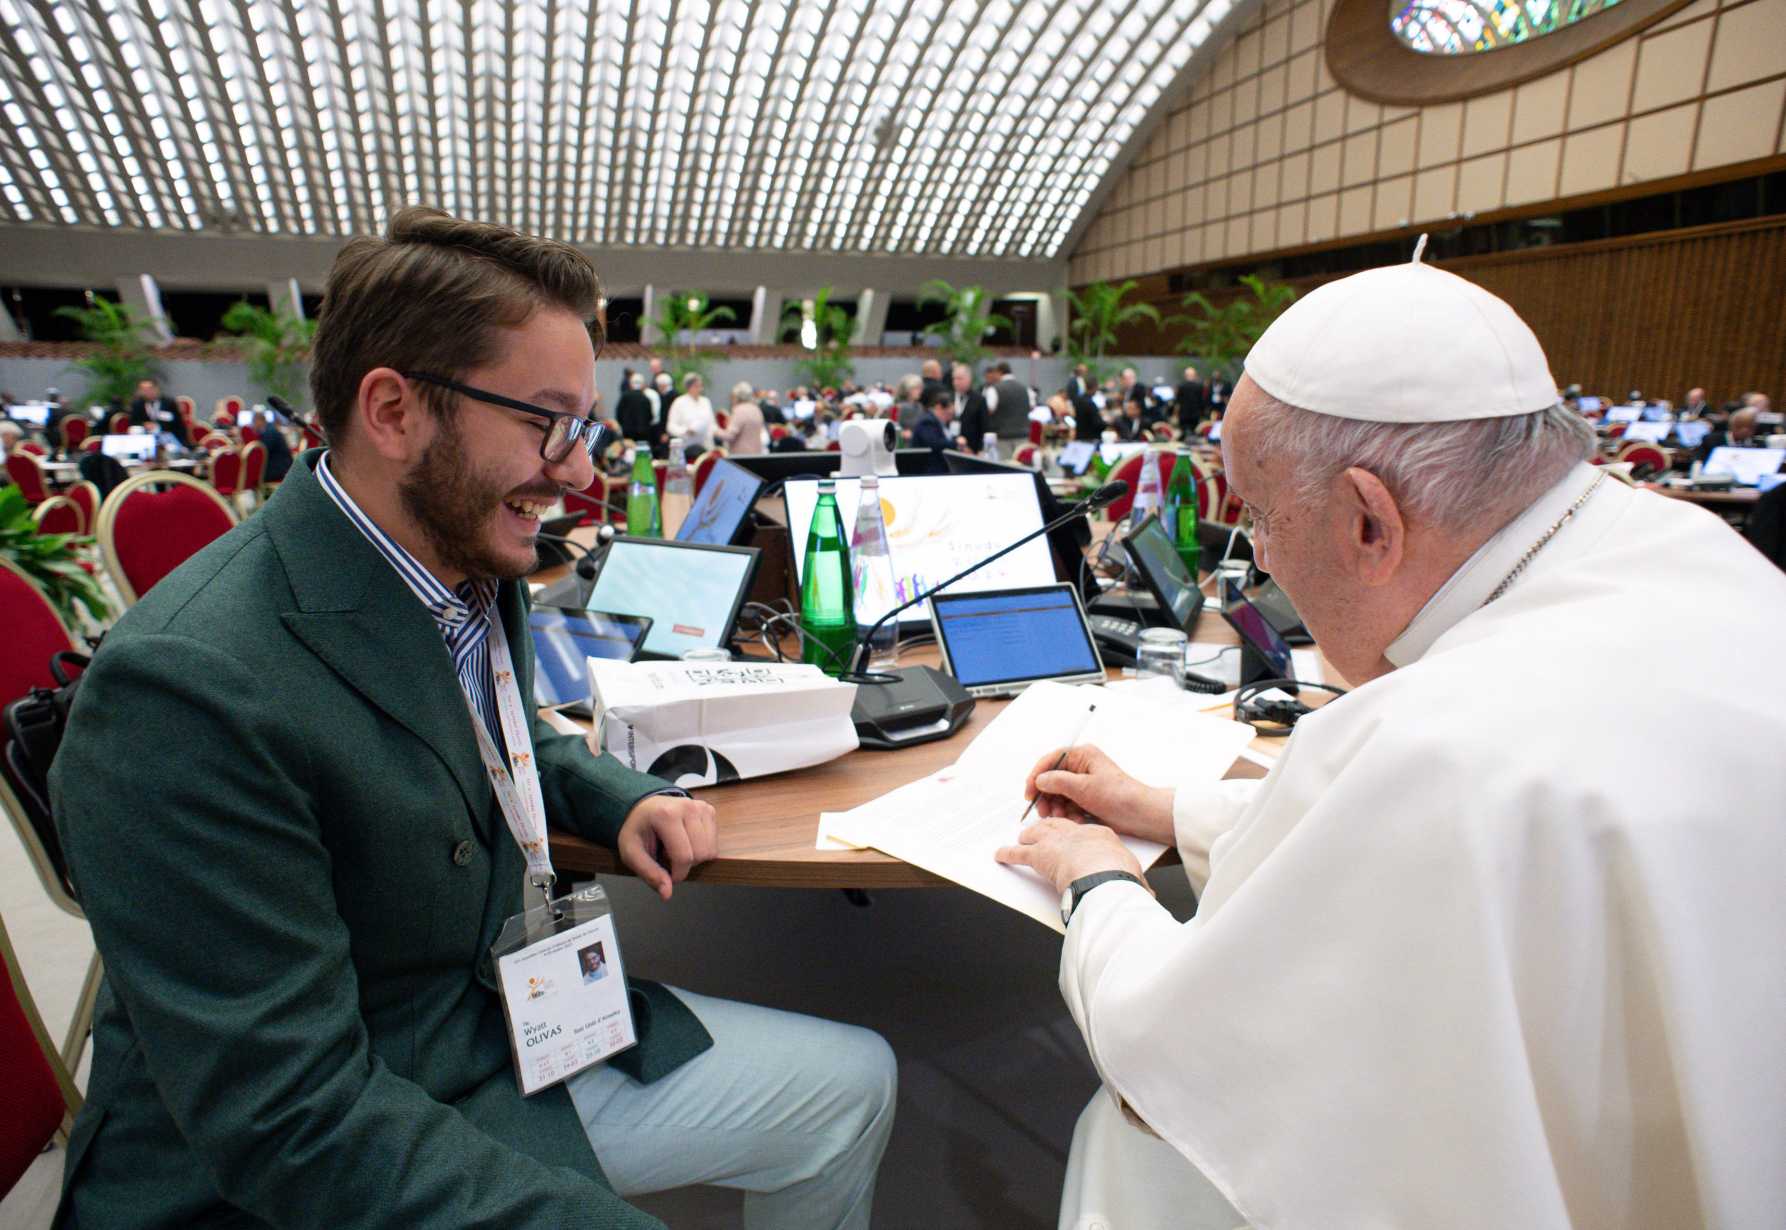 U.S. synod delegate receives papal permission slip to cut class